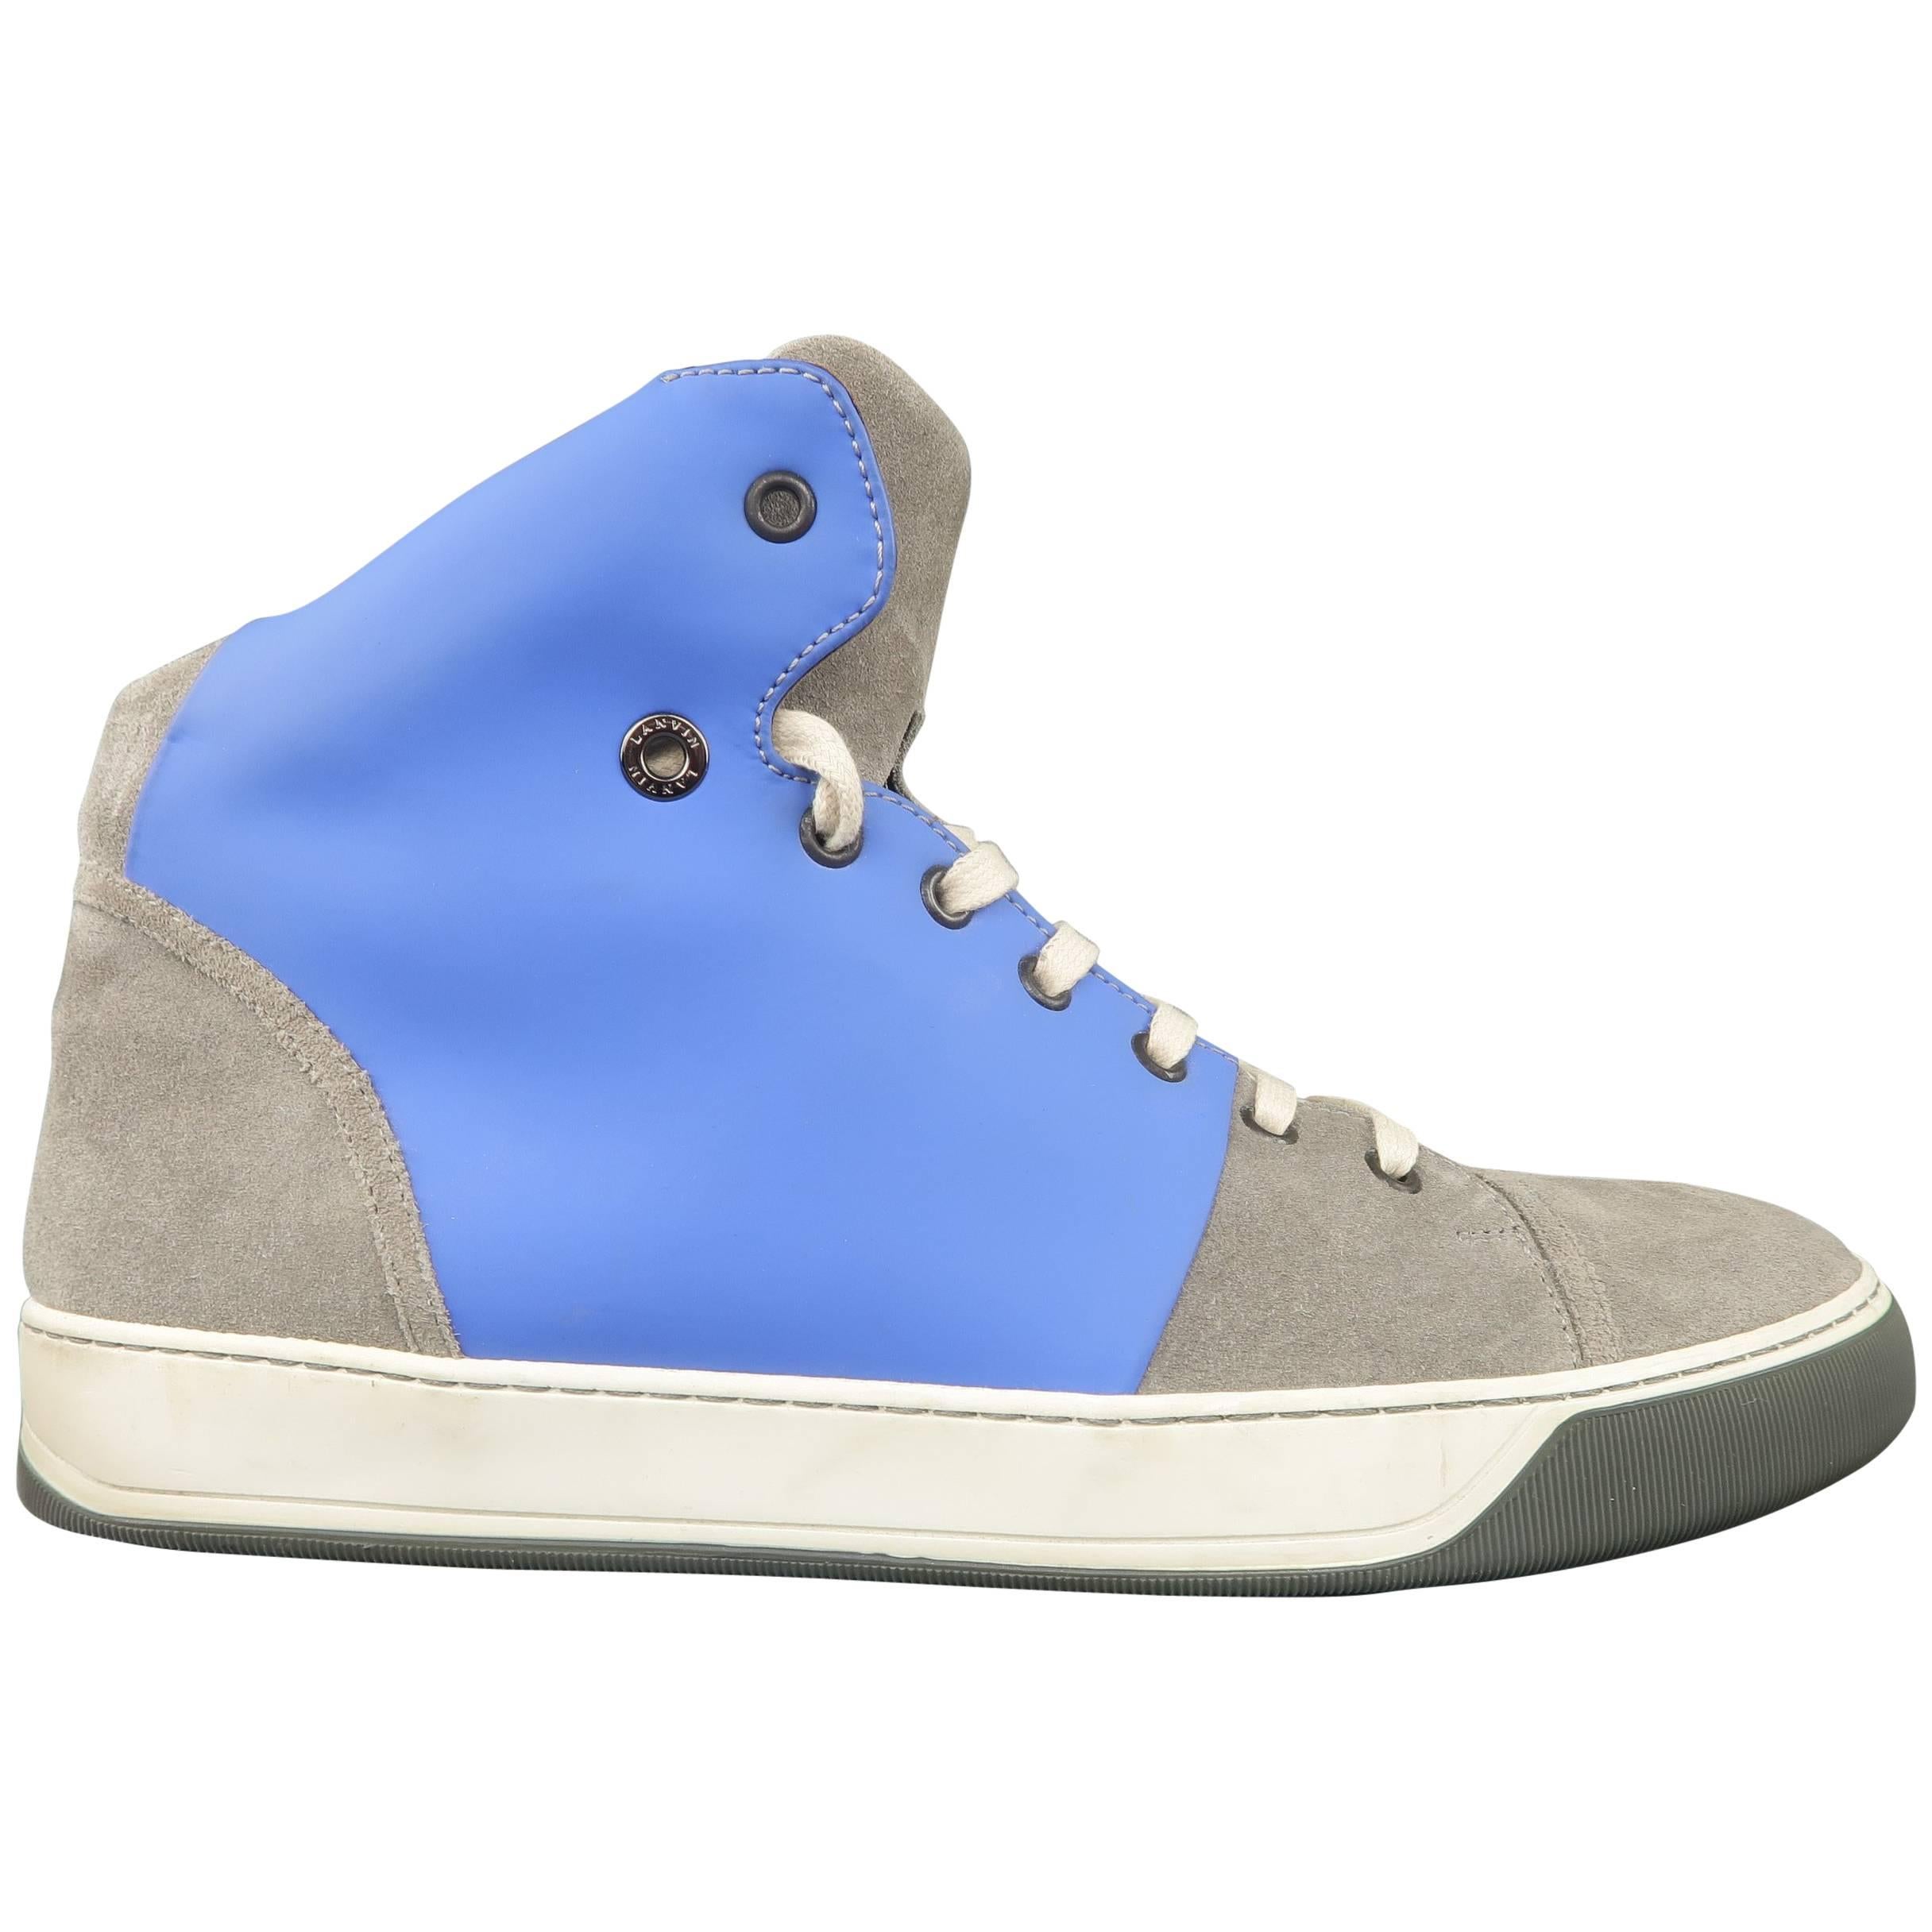 Men's LANVIN Size 8 Grey Suede & Blue Rubber Two Toned High Top Sneakers